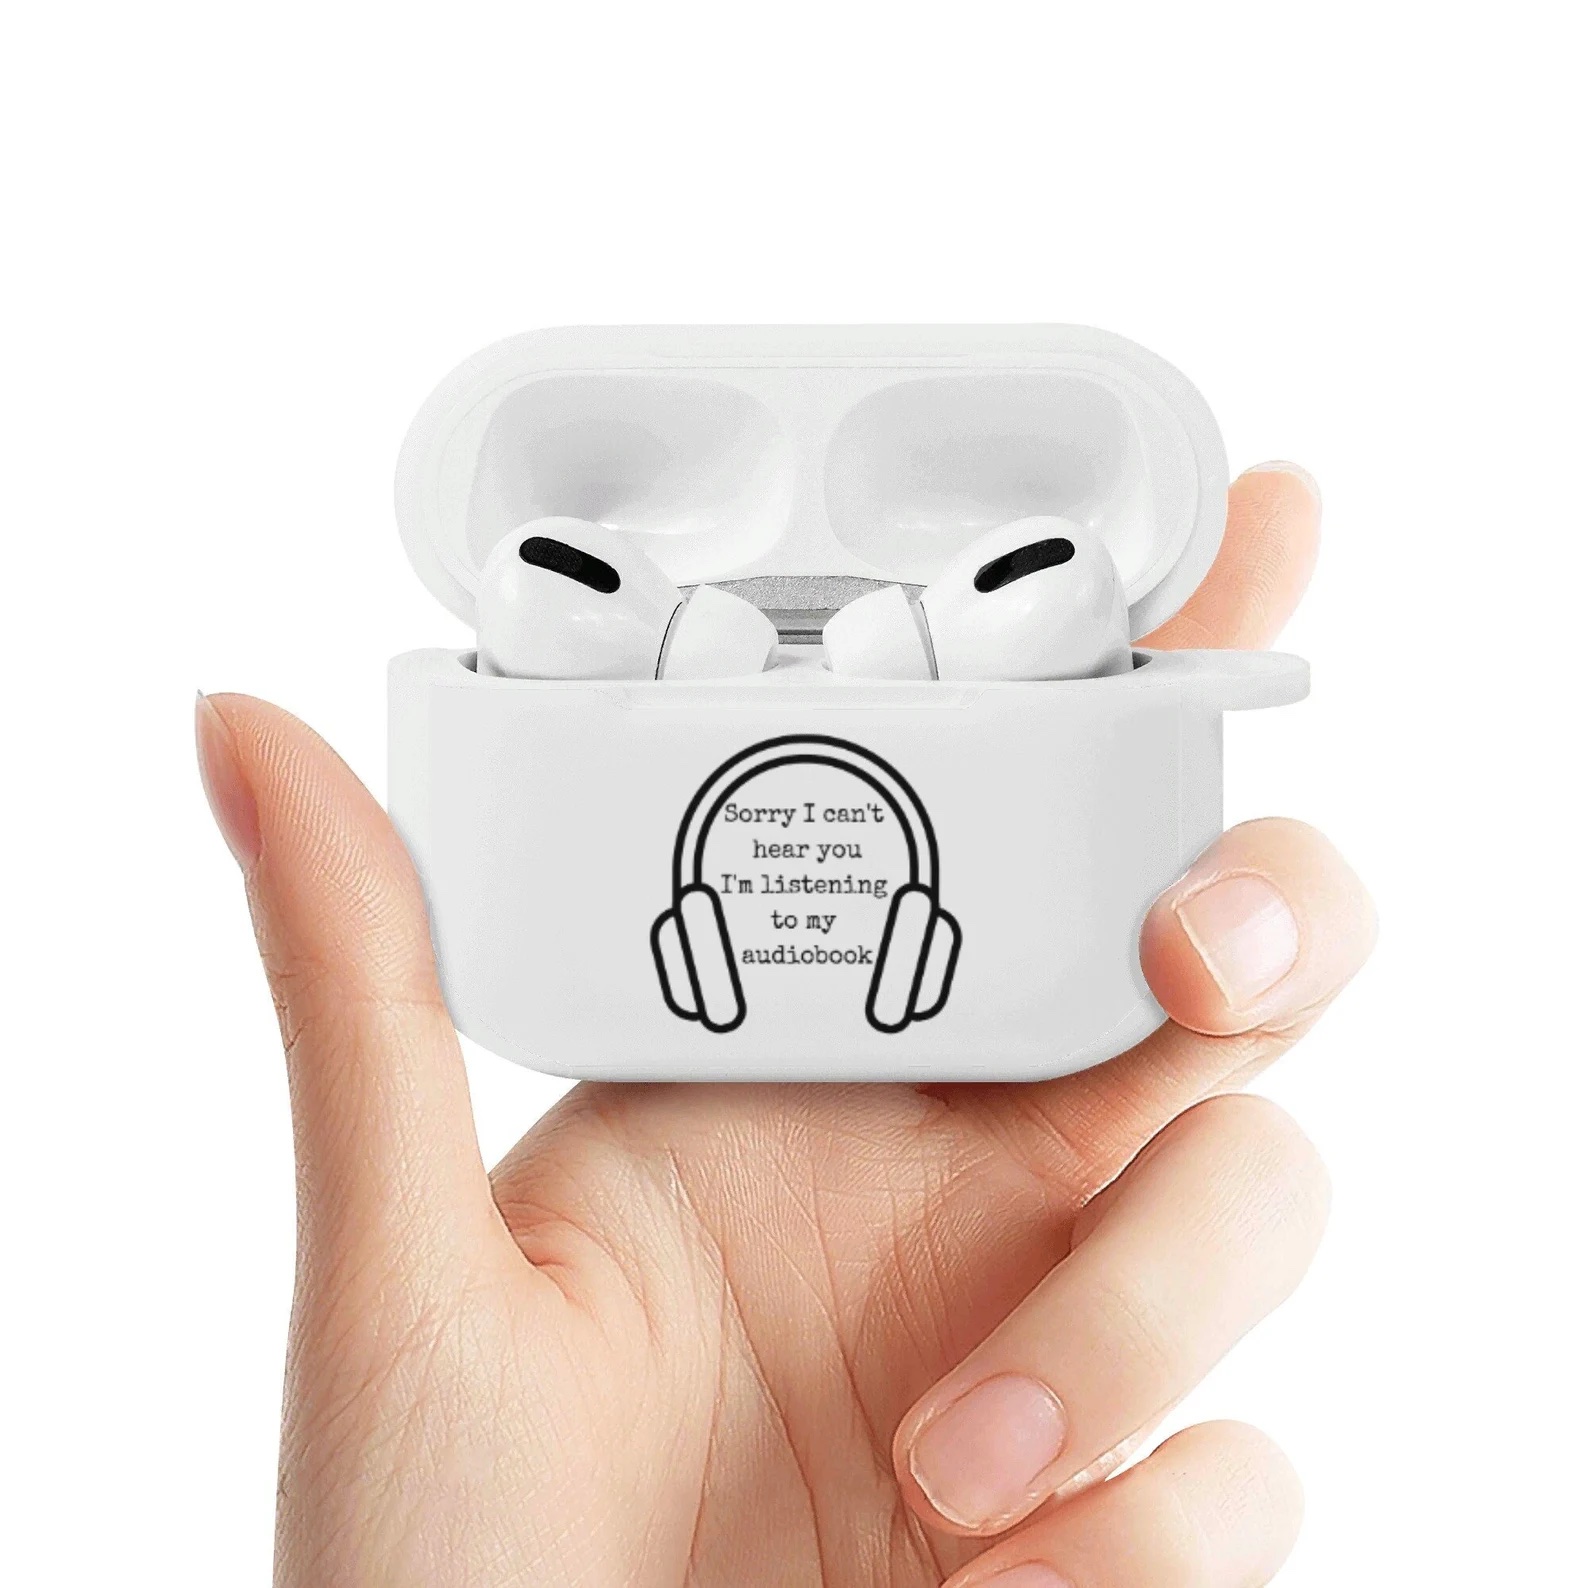 A photo of an AirPods case the says, "I can't hear you. I'm listening to me audiobook."